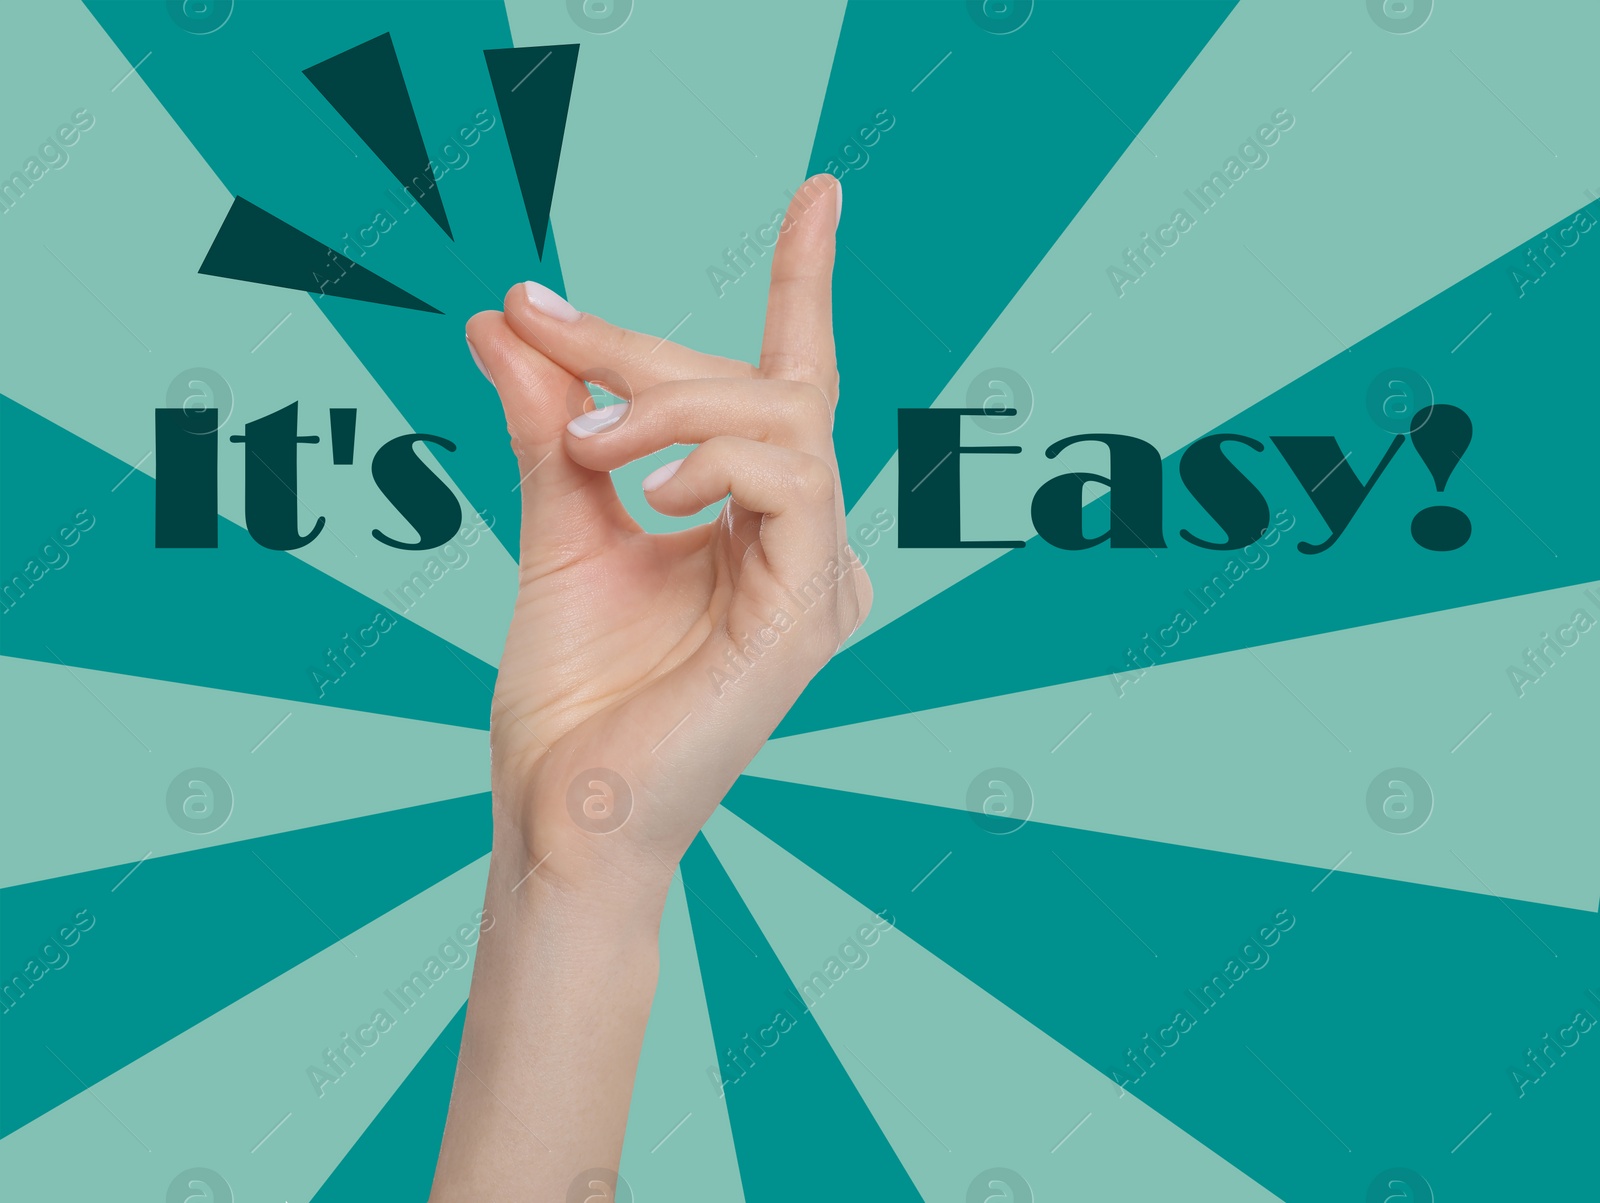 Image of Phrase It's Easy and woman snapping fingers on color background, closeup